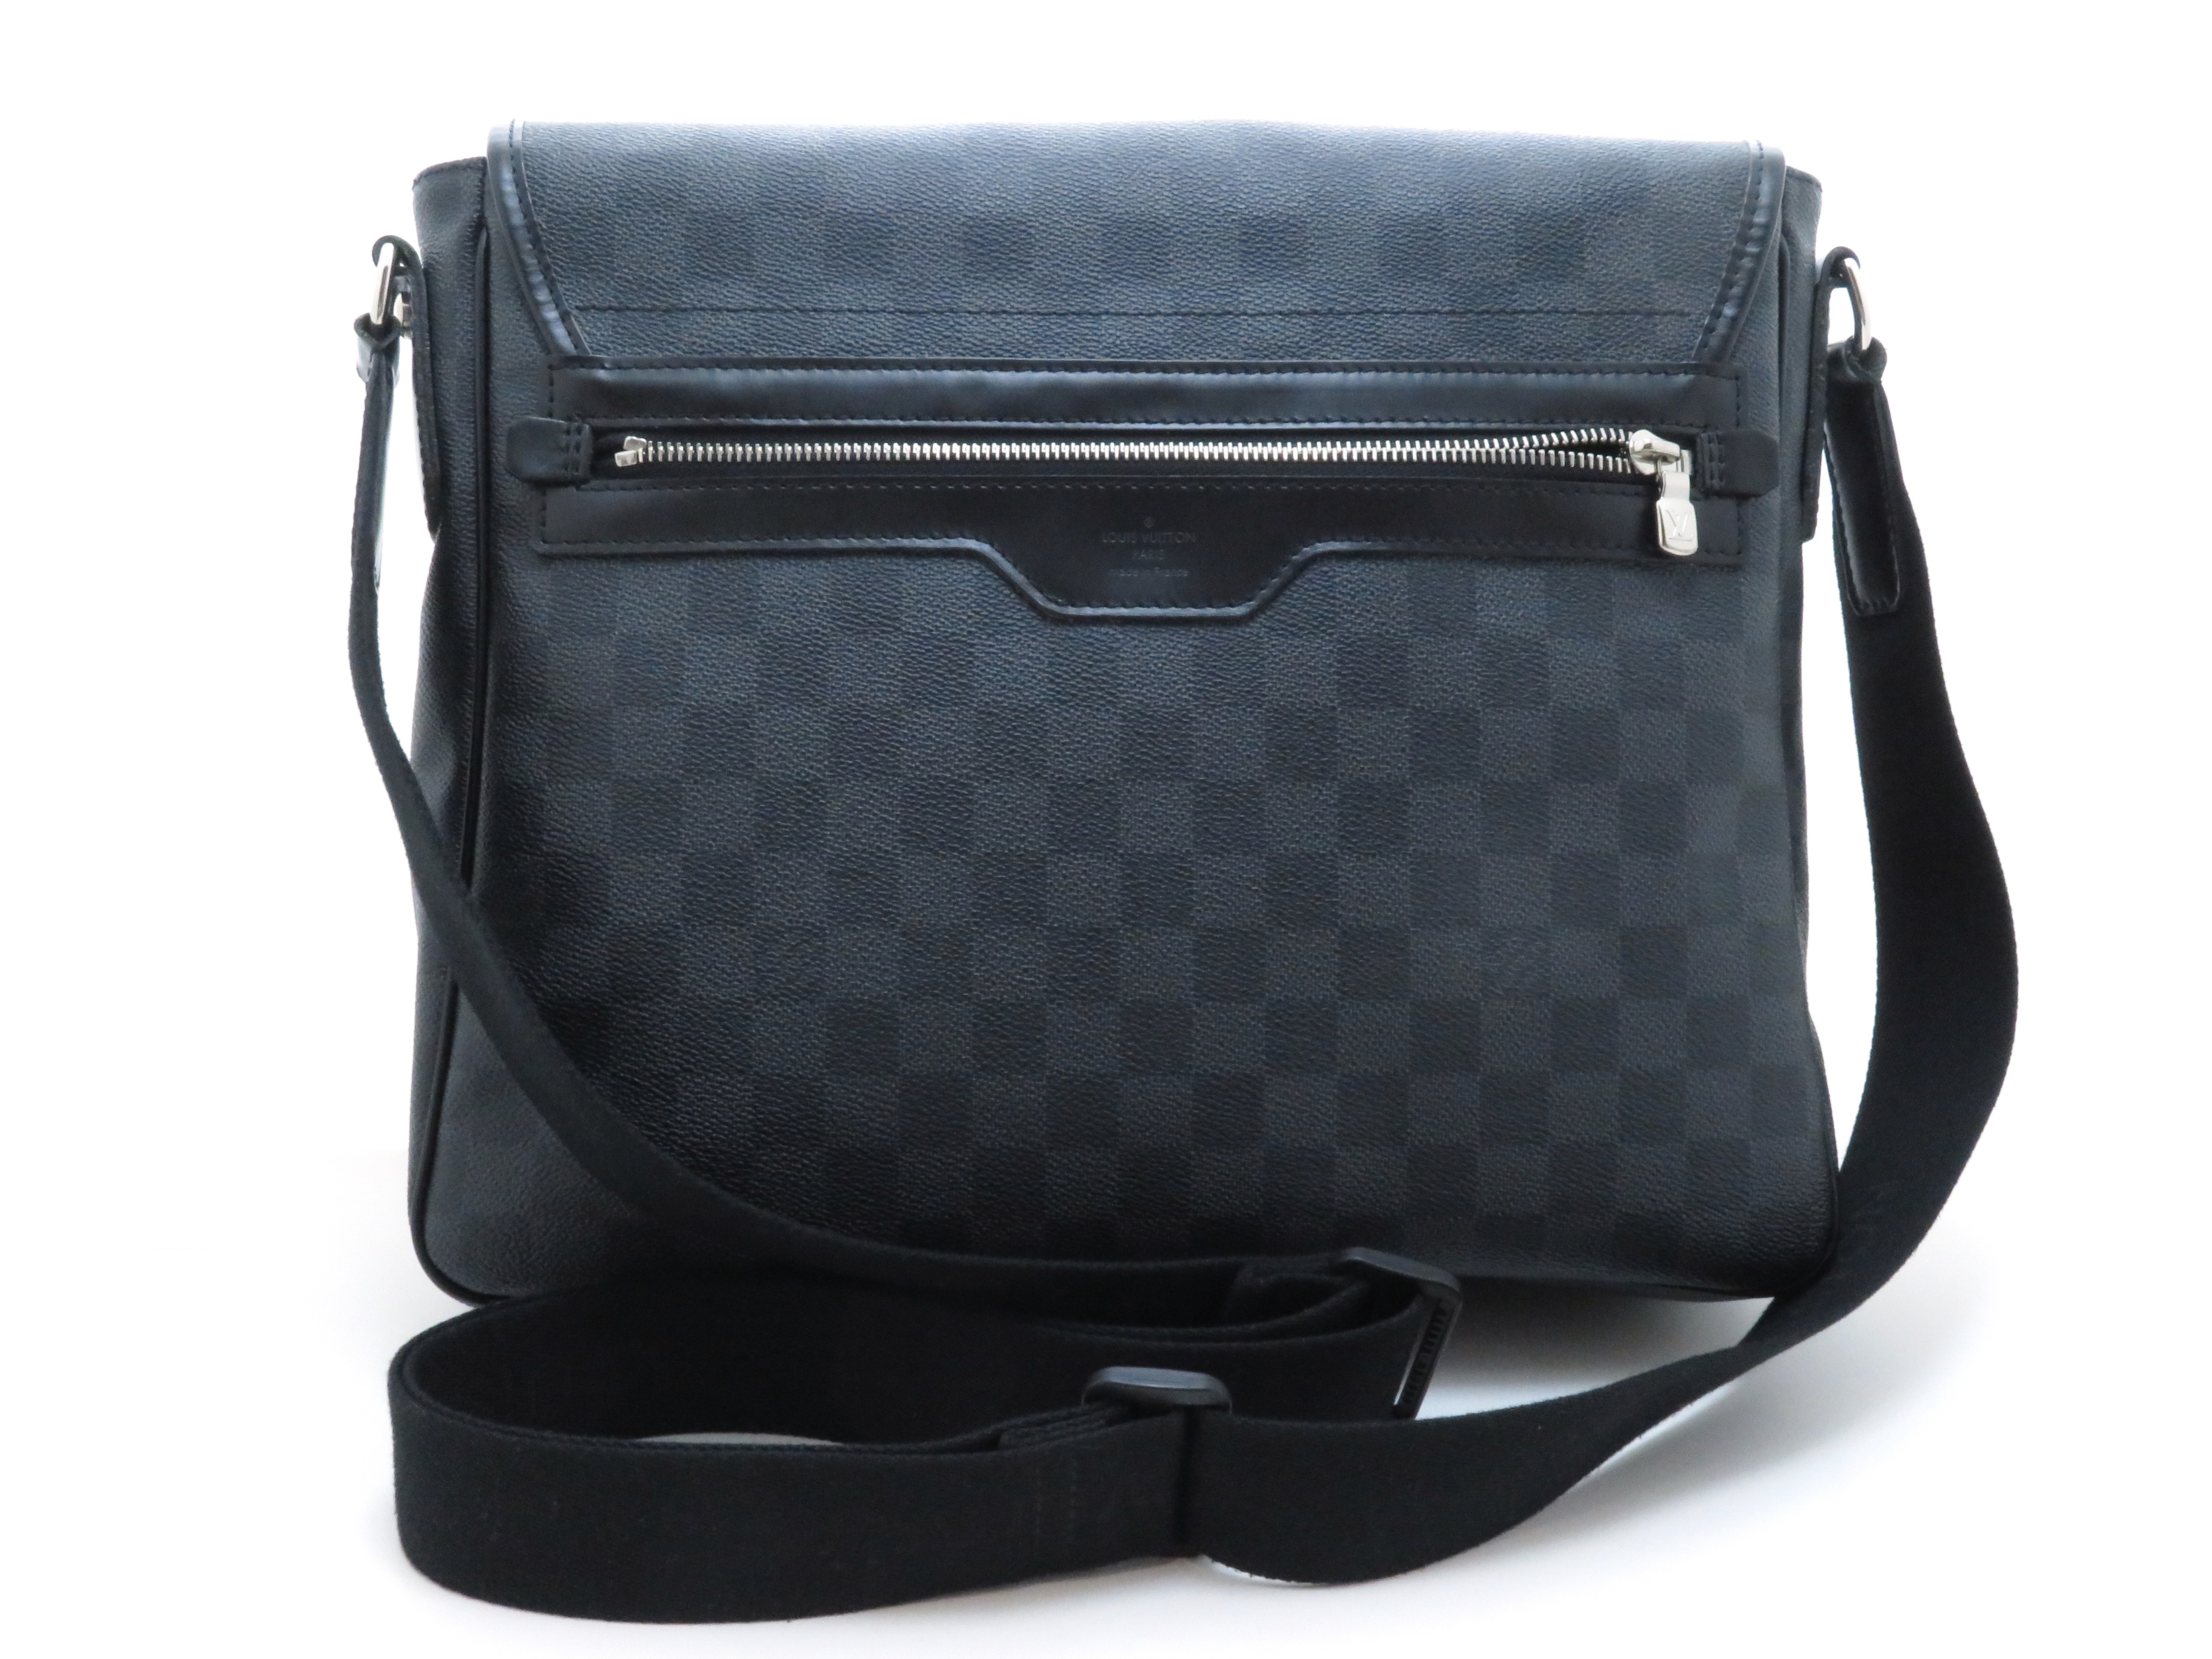 LOUIS VUITTON ルイ・ヴィトン レンツォ ダミエ・グラフィット N51213 ...